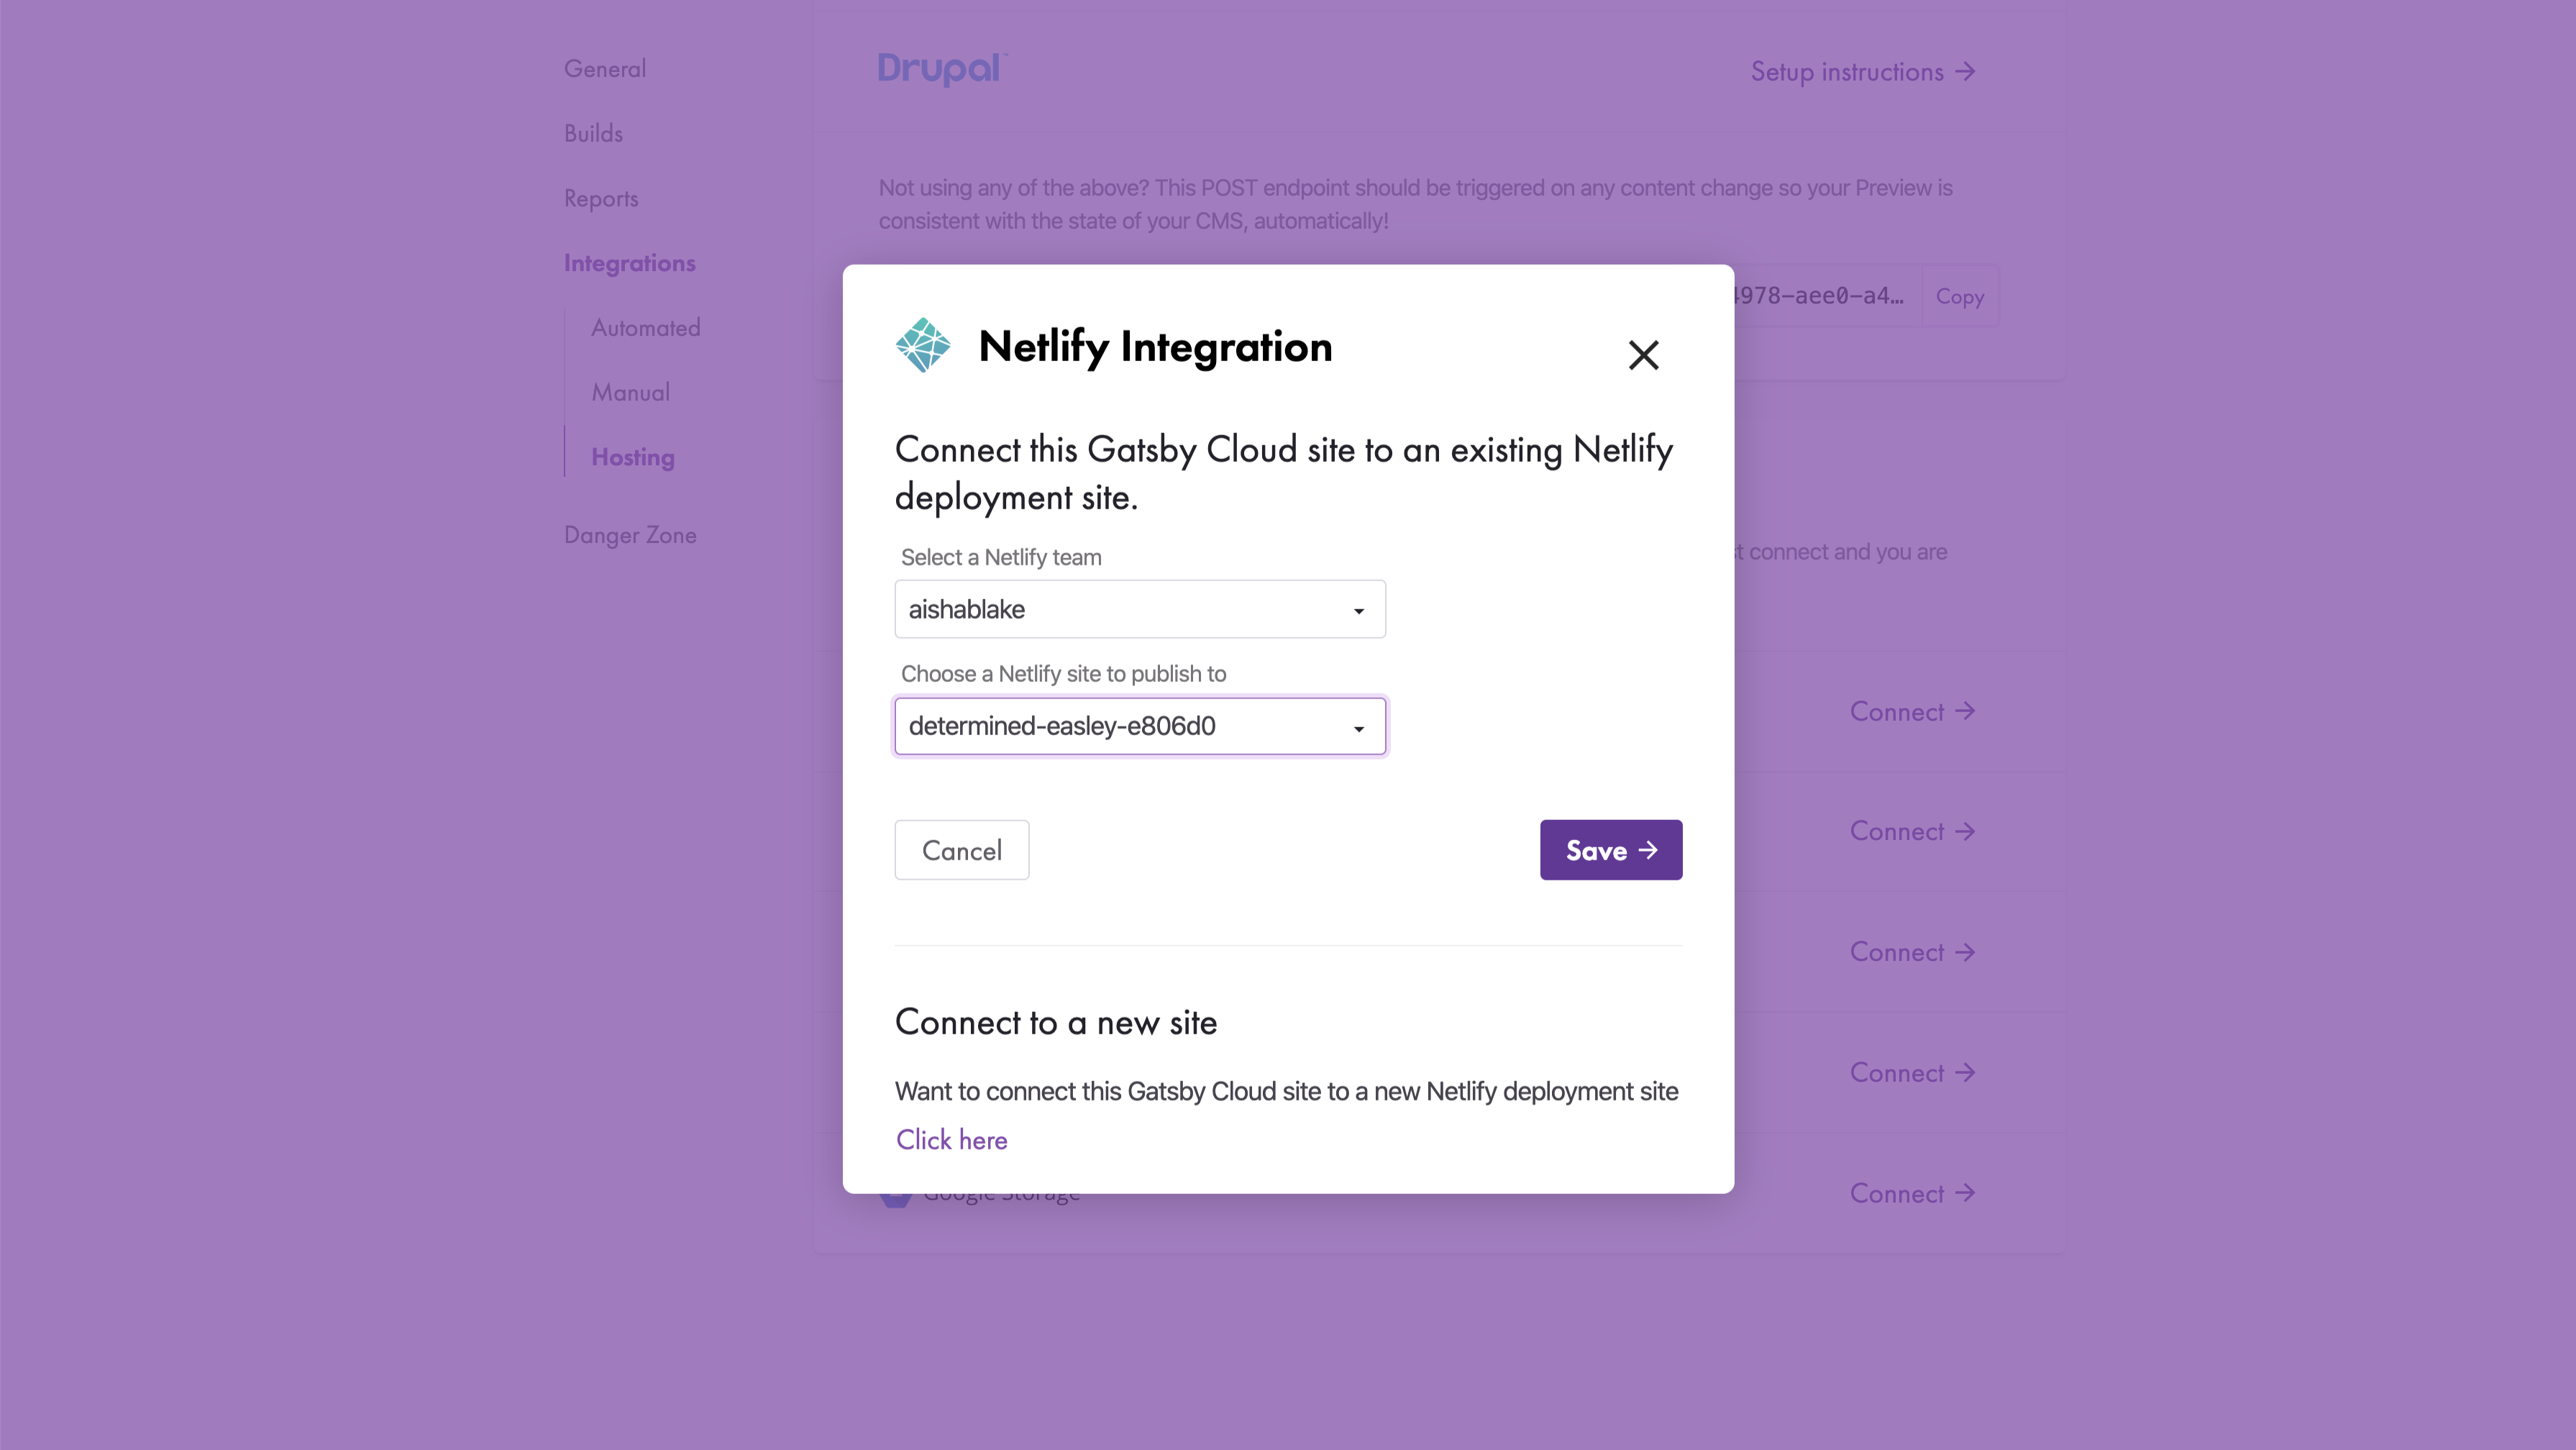 Netlify integration overlay prompts the user to choose a team and a site